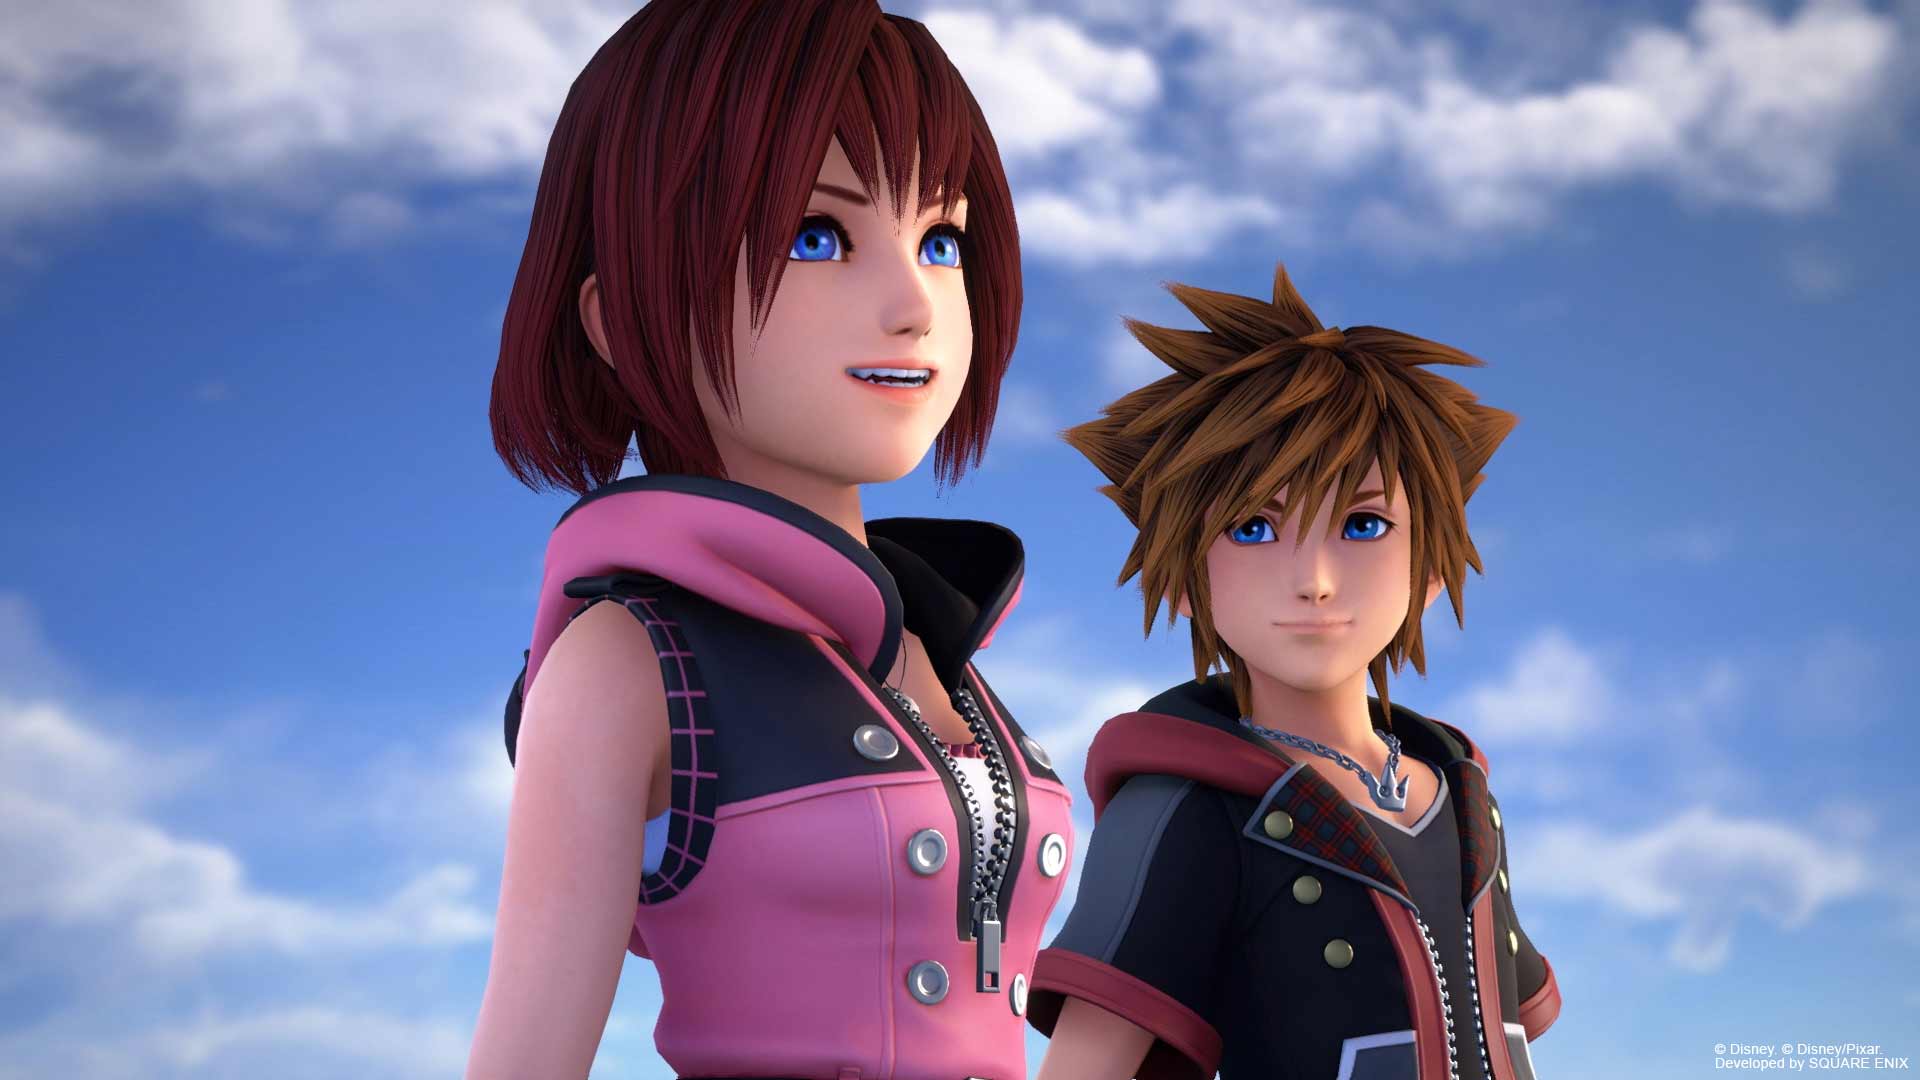 Square Enix has answered the question, "What order should you play Kingdom Hearts?"